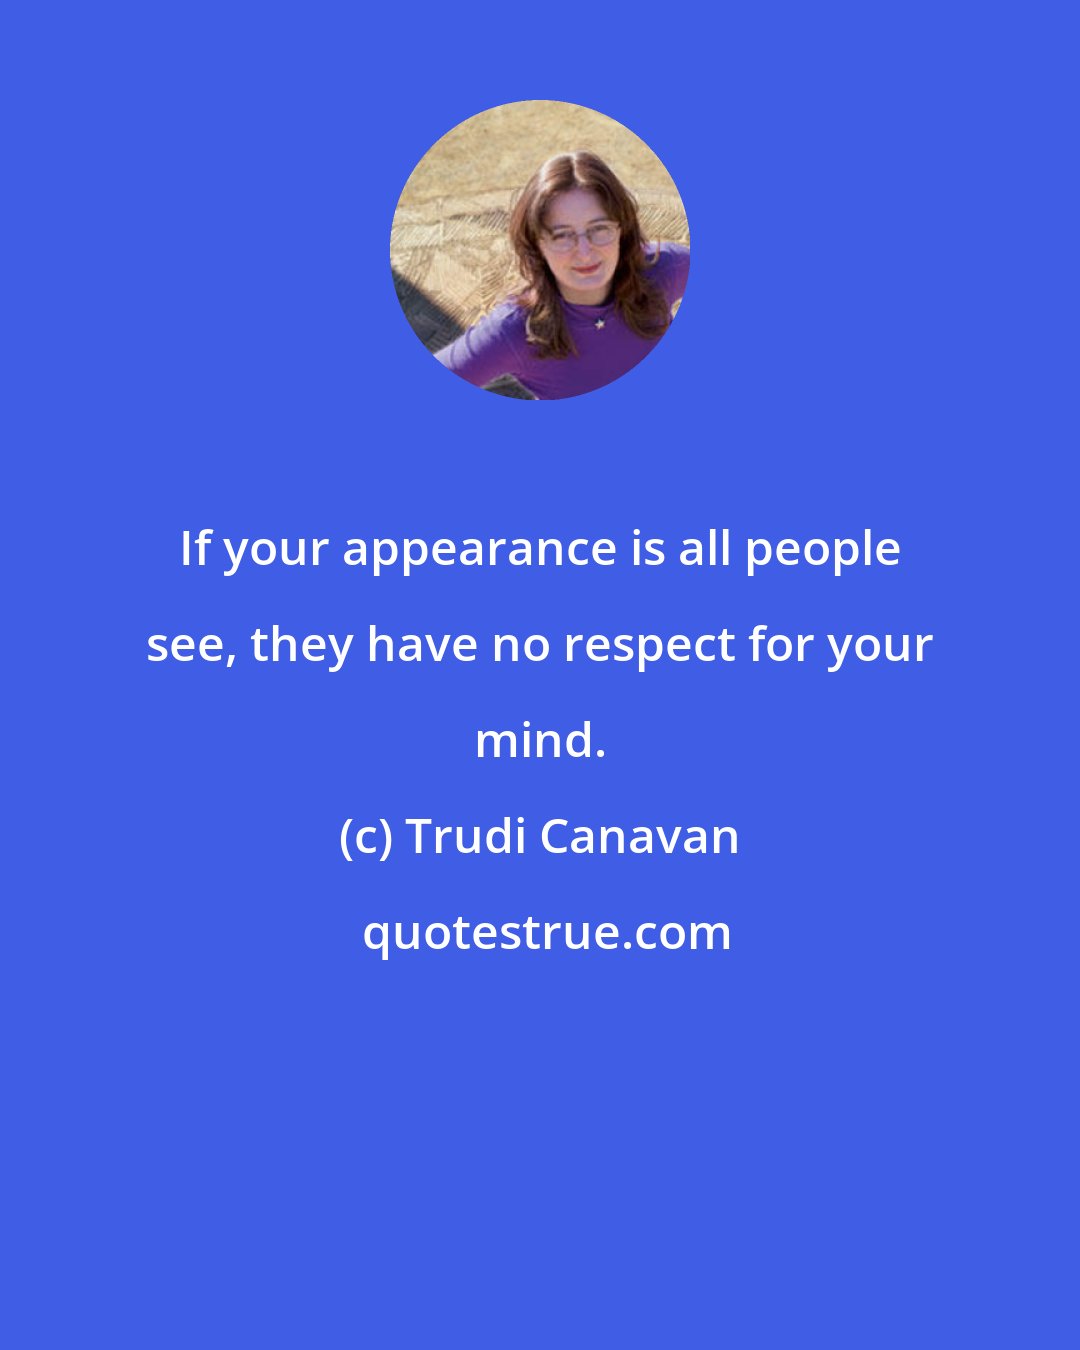 Trudi Canavan: If your appearance is all people see, they have no respect for your mind.